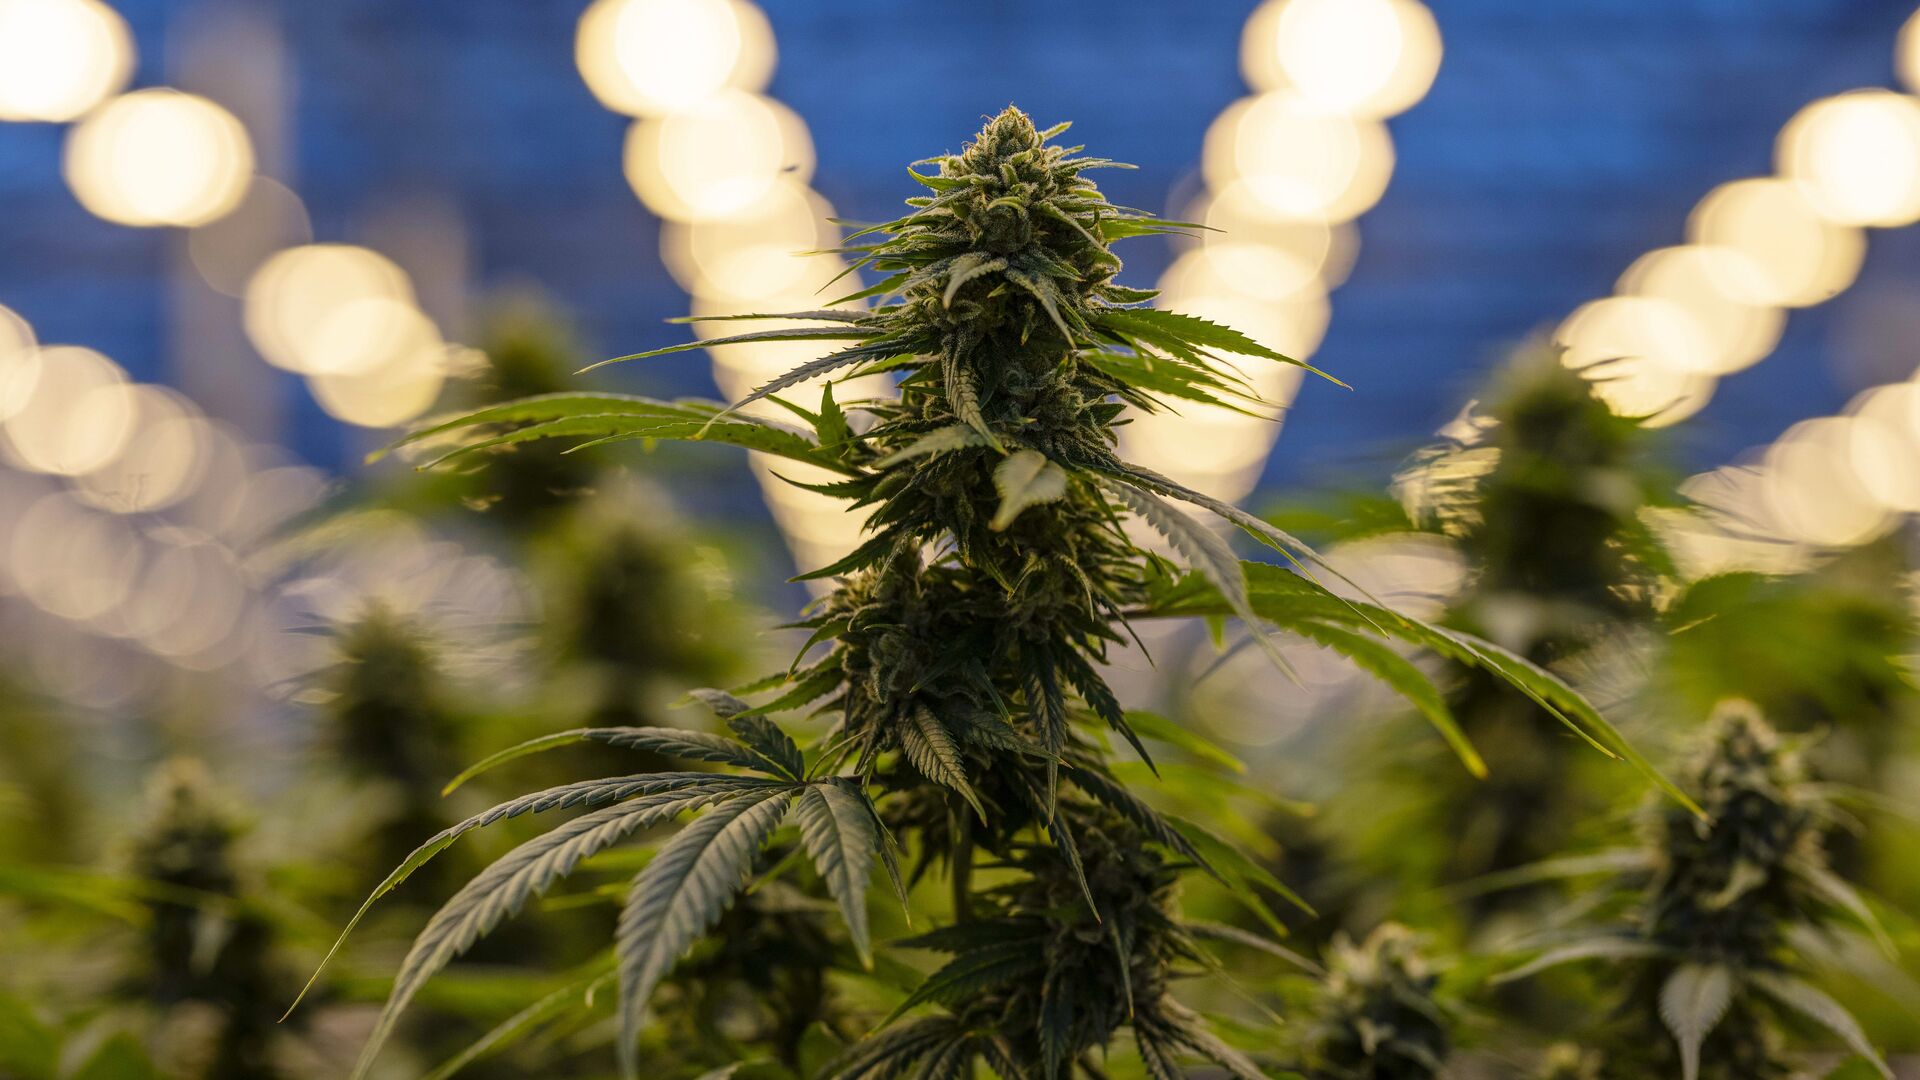 In the 2nd episode of Cowen's The Growth Chamber, COO of Verano Holdings, Darren Weiss, discusses competition in the cannabis industry. The image is of a cannabis green house with rows of budding plants under lights.